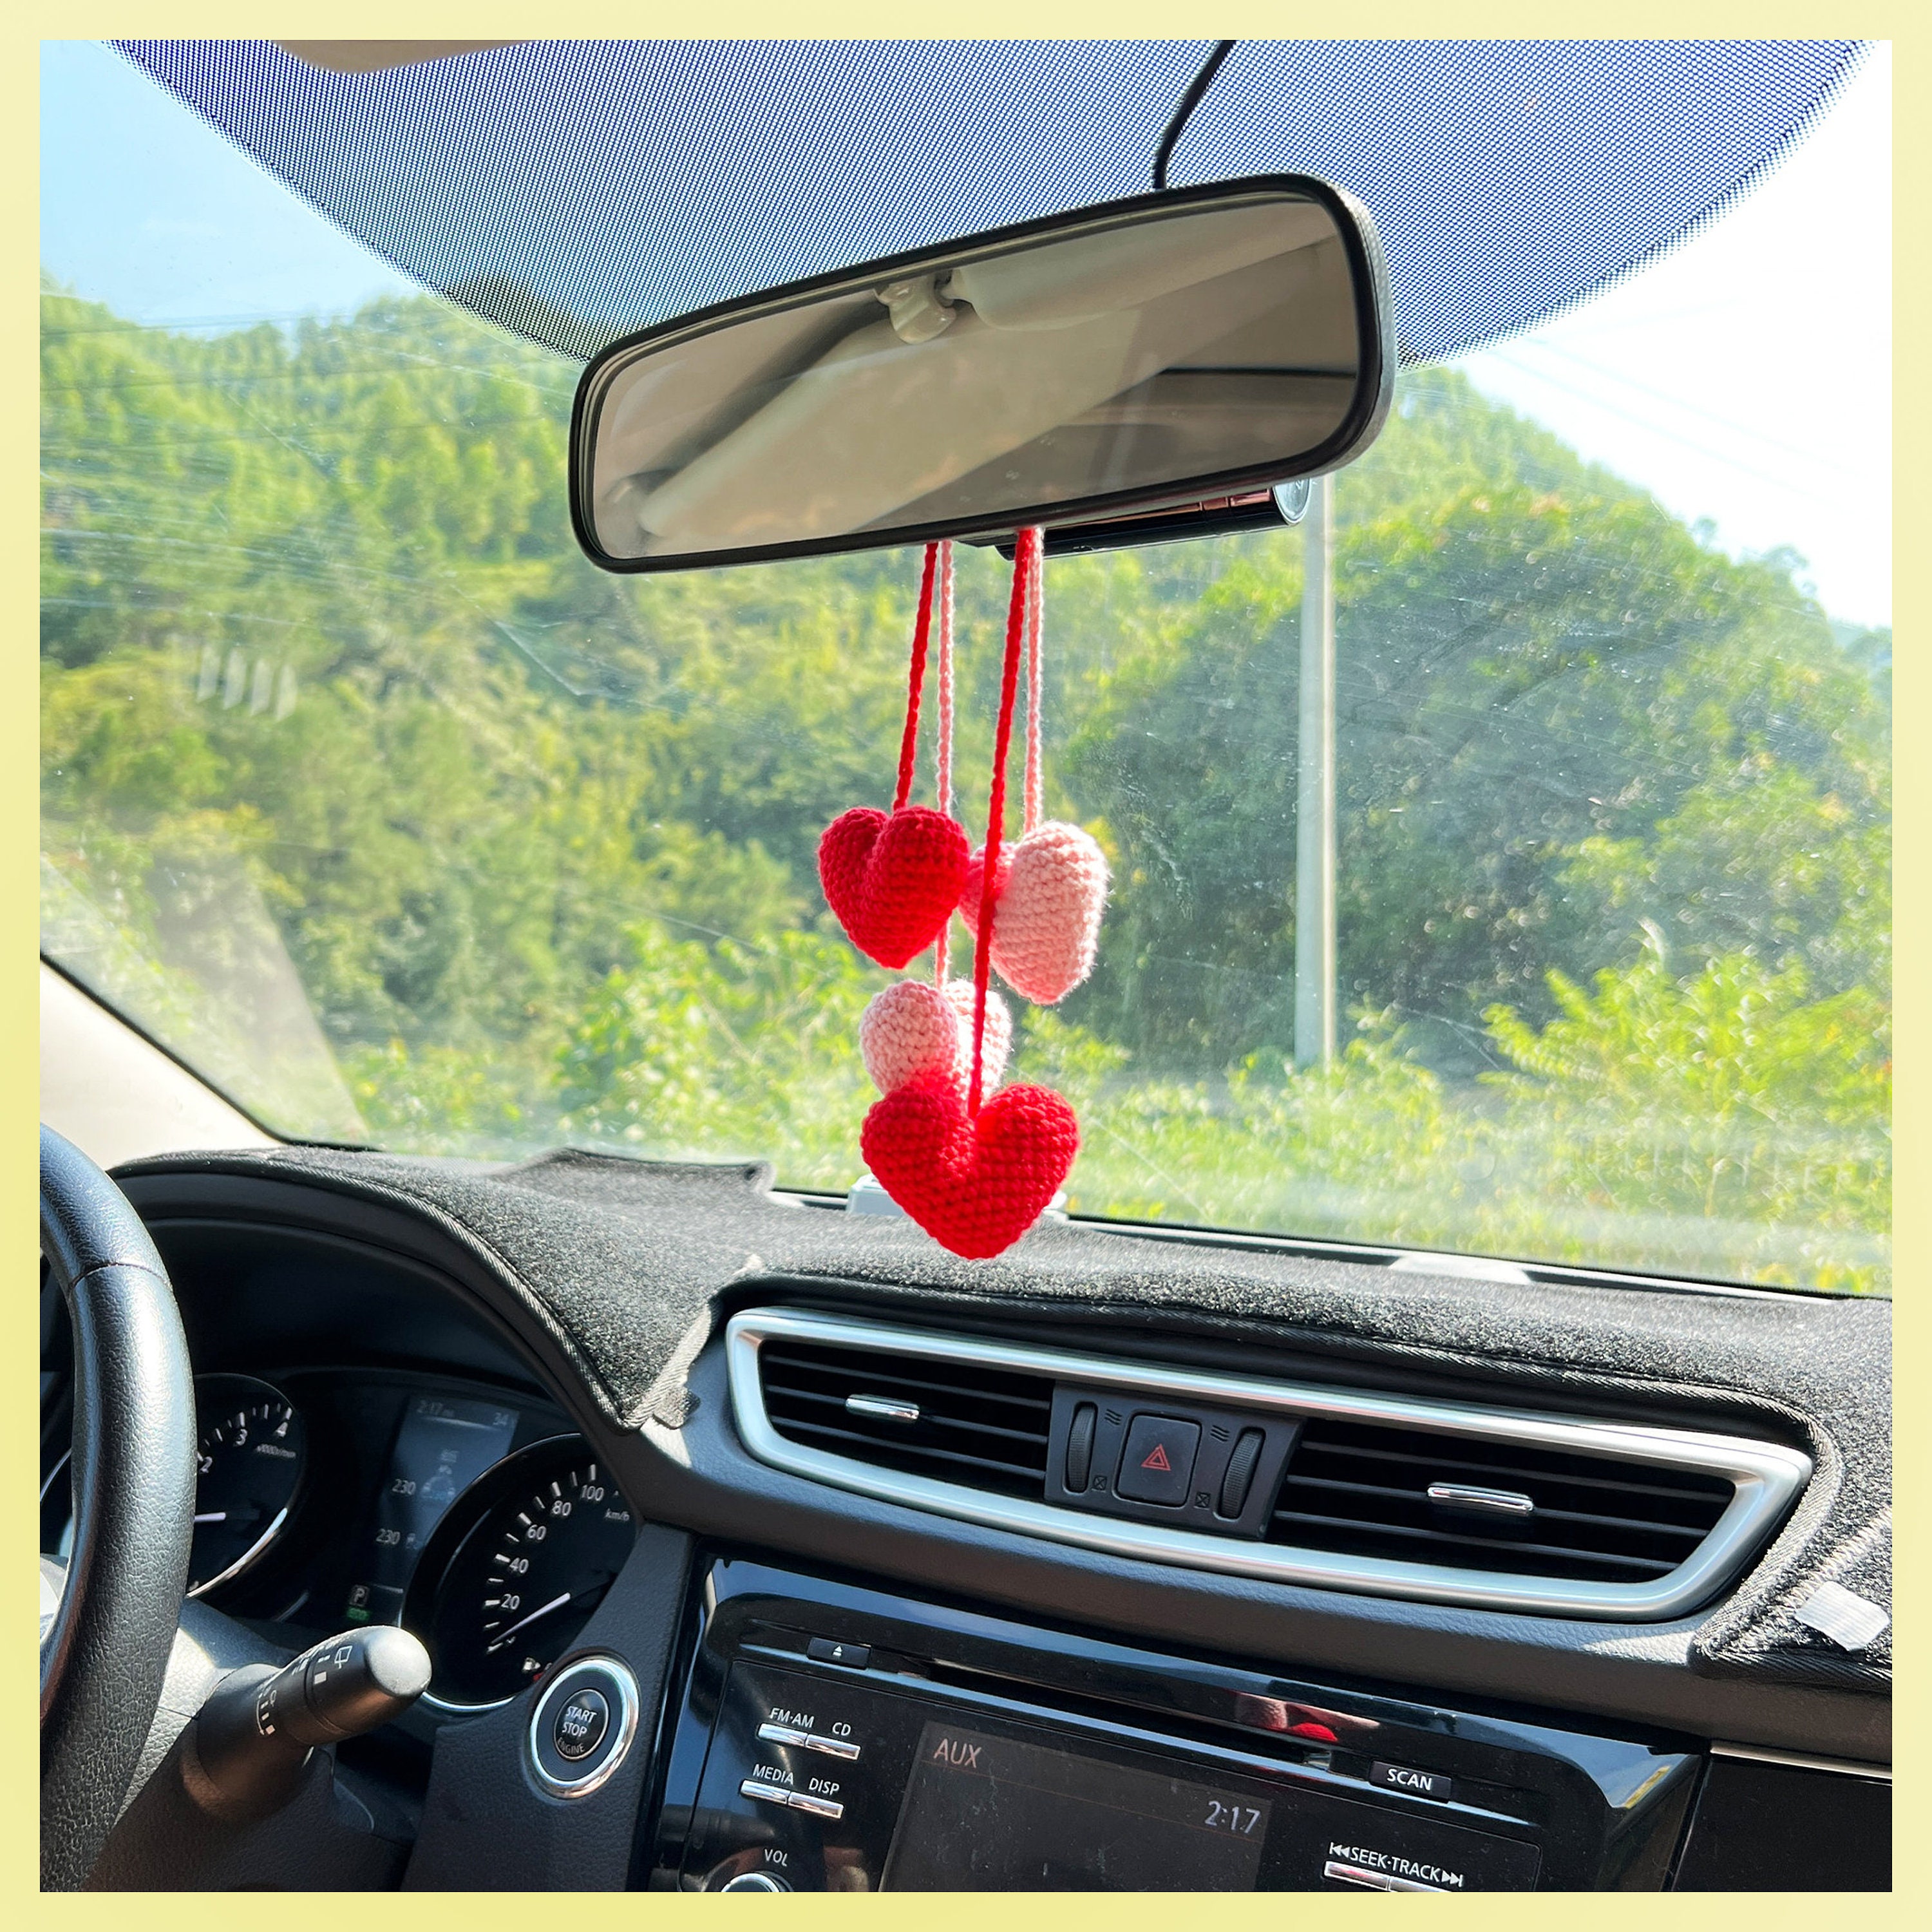 Heart with heart cutout, Car Air Freshener, Freshie, Scents, Vehicle  Freshener, Aroma Bead freshener, Ornament, Car Candle, Valentine's Day